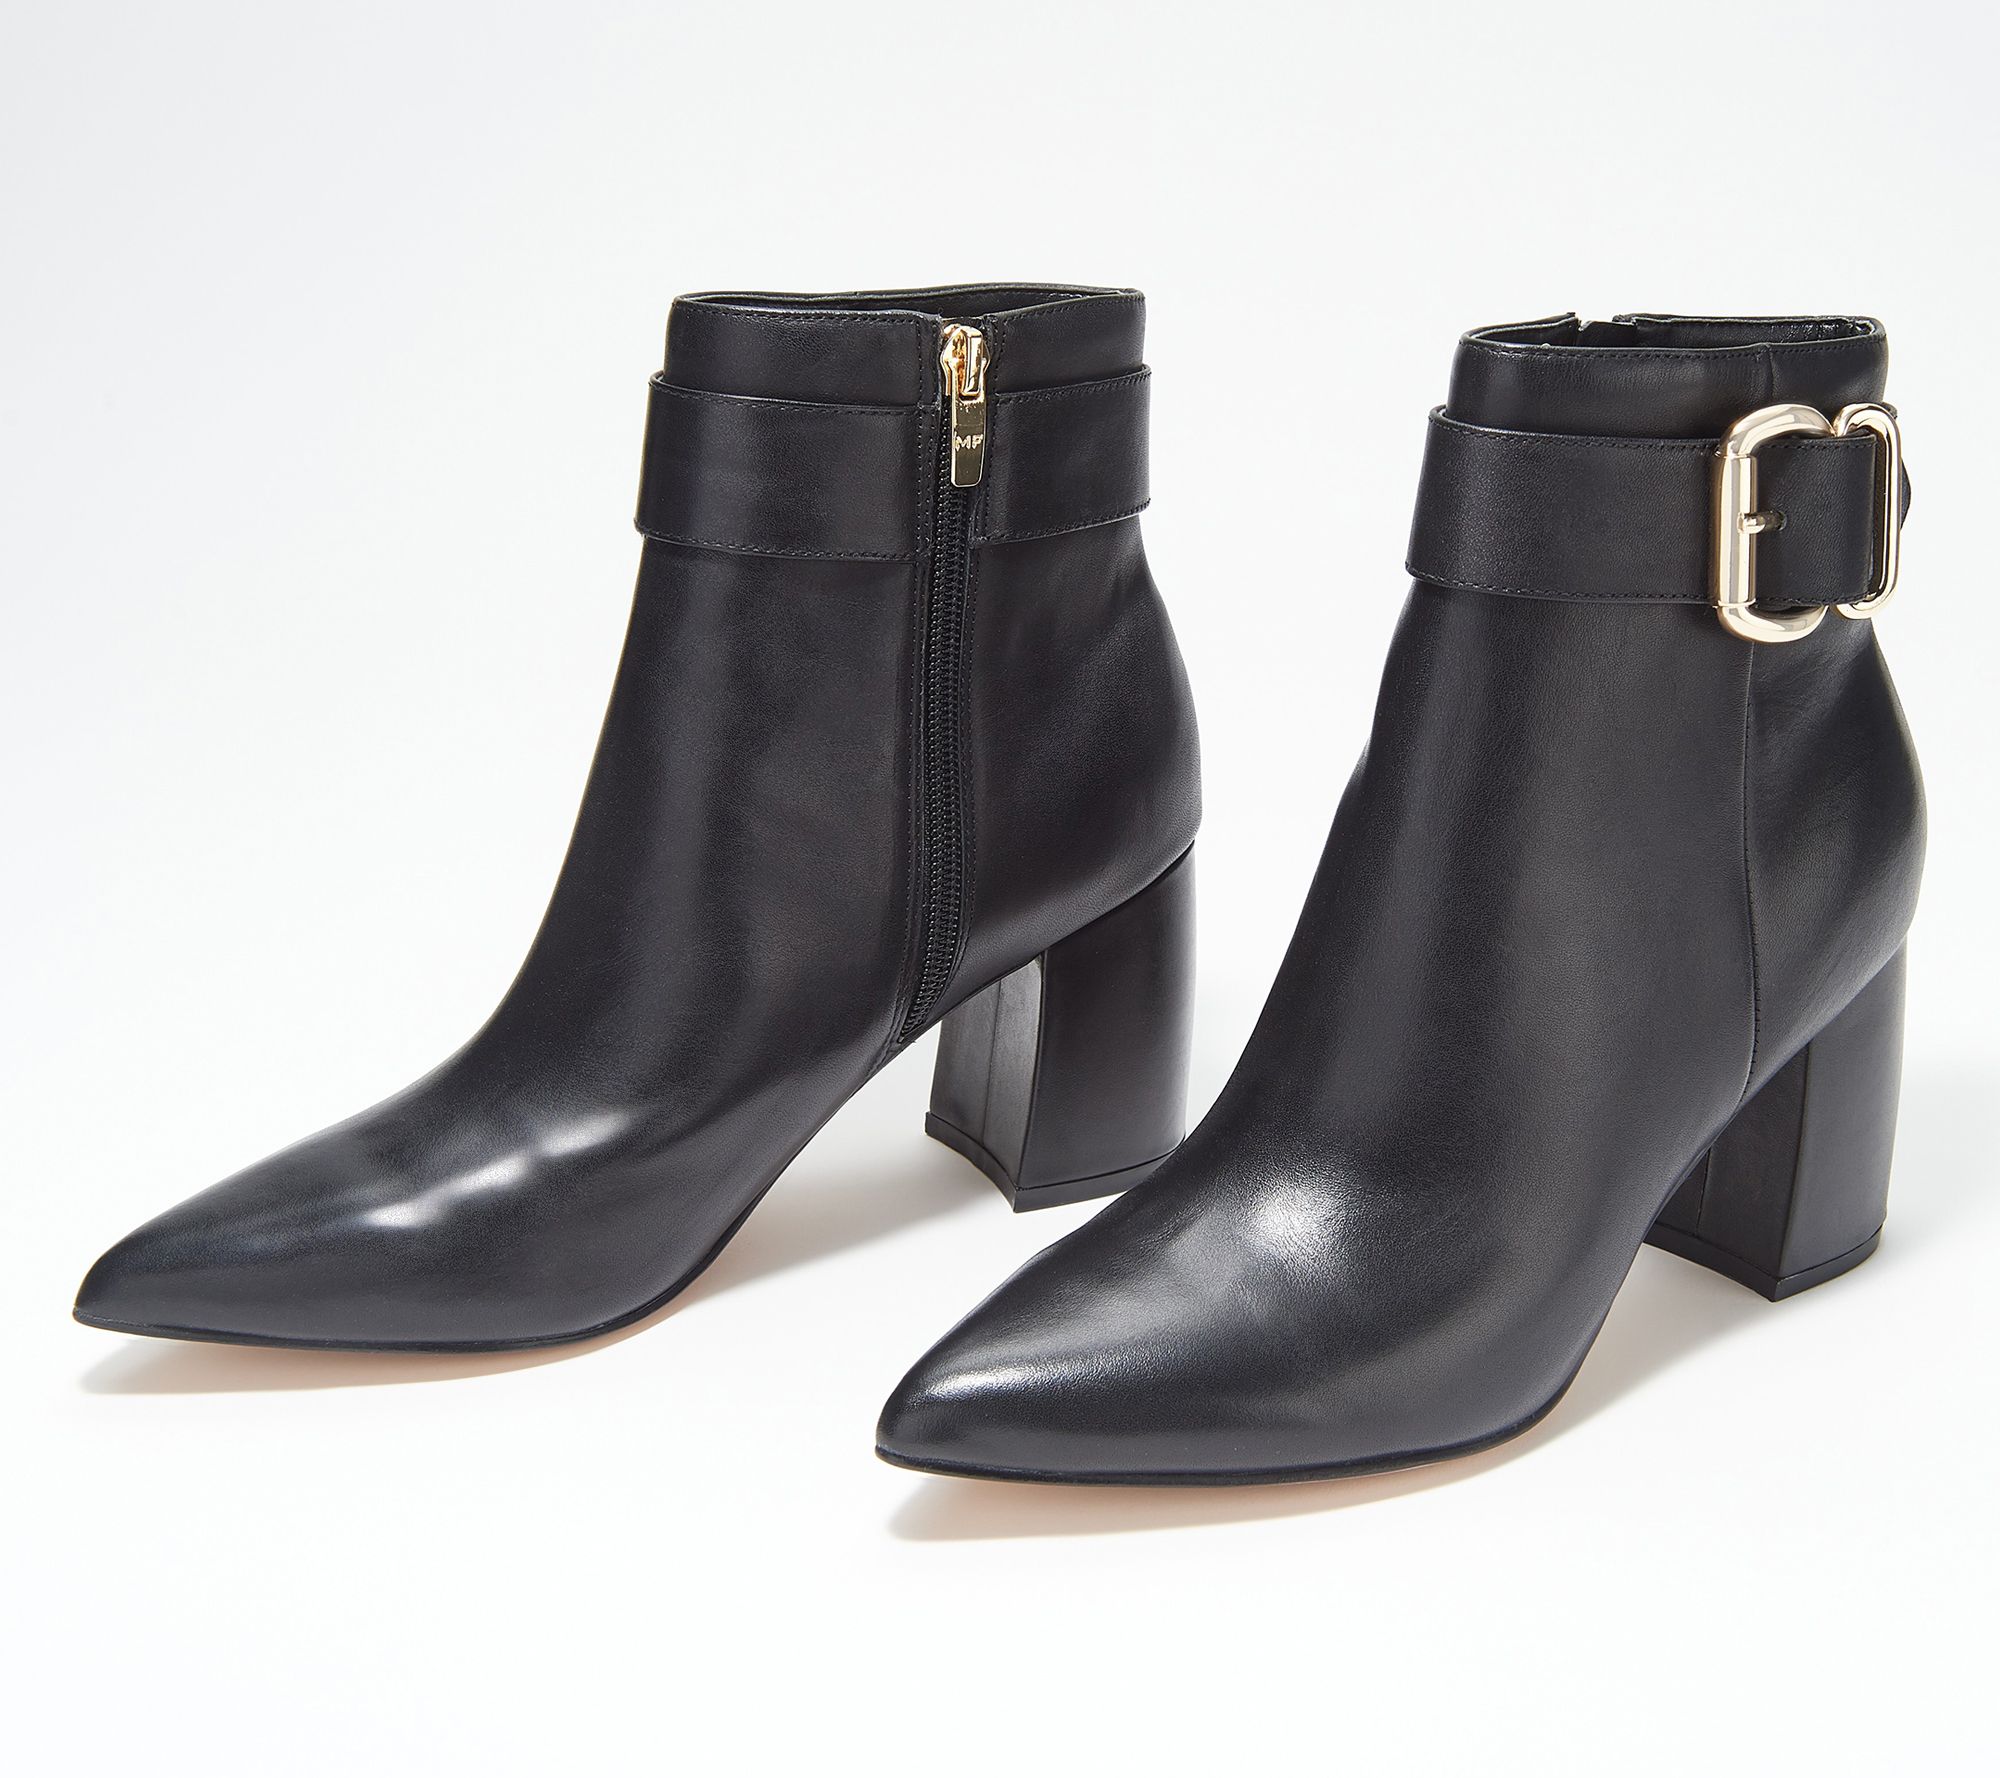 Marc Fisher Leather Buckle Ankle Boots - Rymona - QVC.com